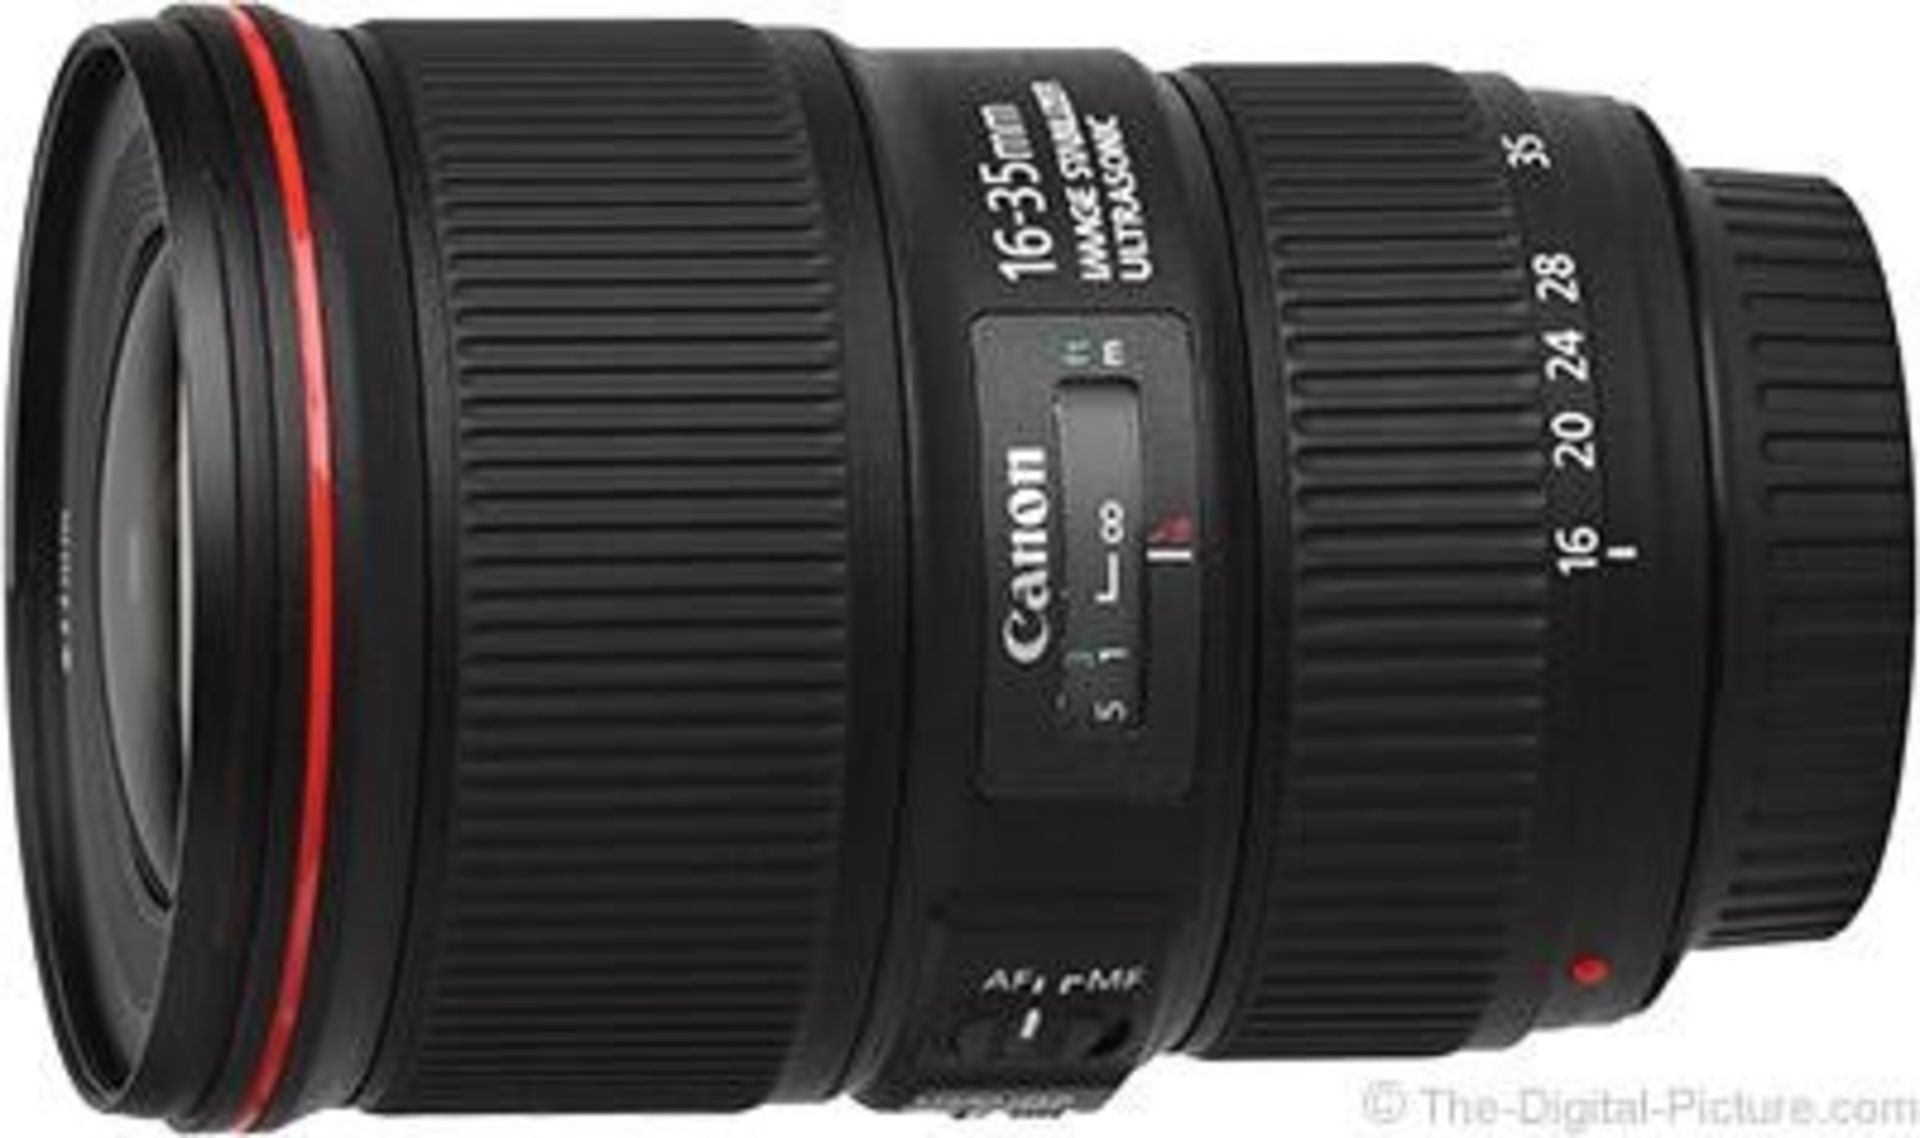 CANON 16-35 MM F/4L 002 IS CAMERA LENS WITH SLEEVE